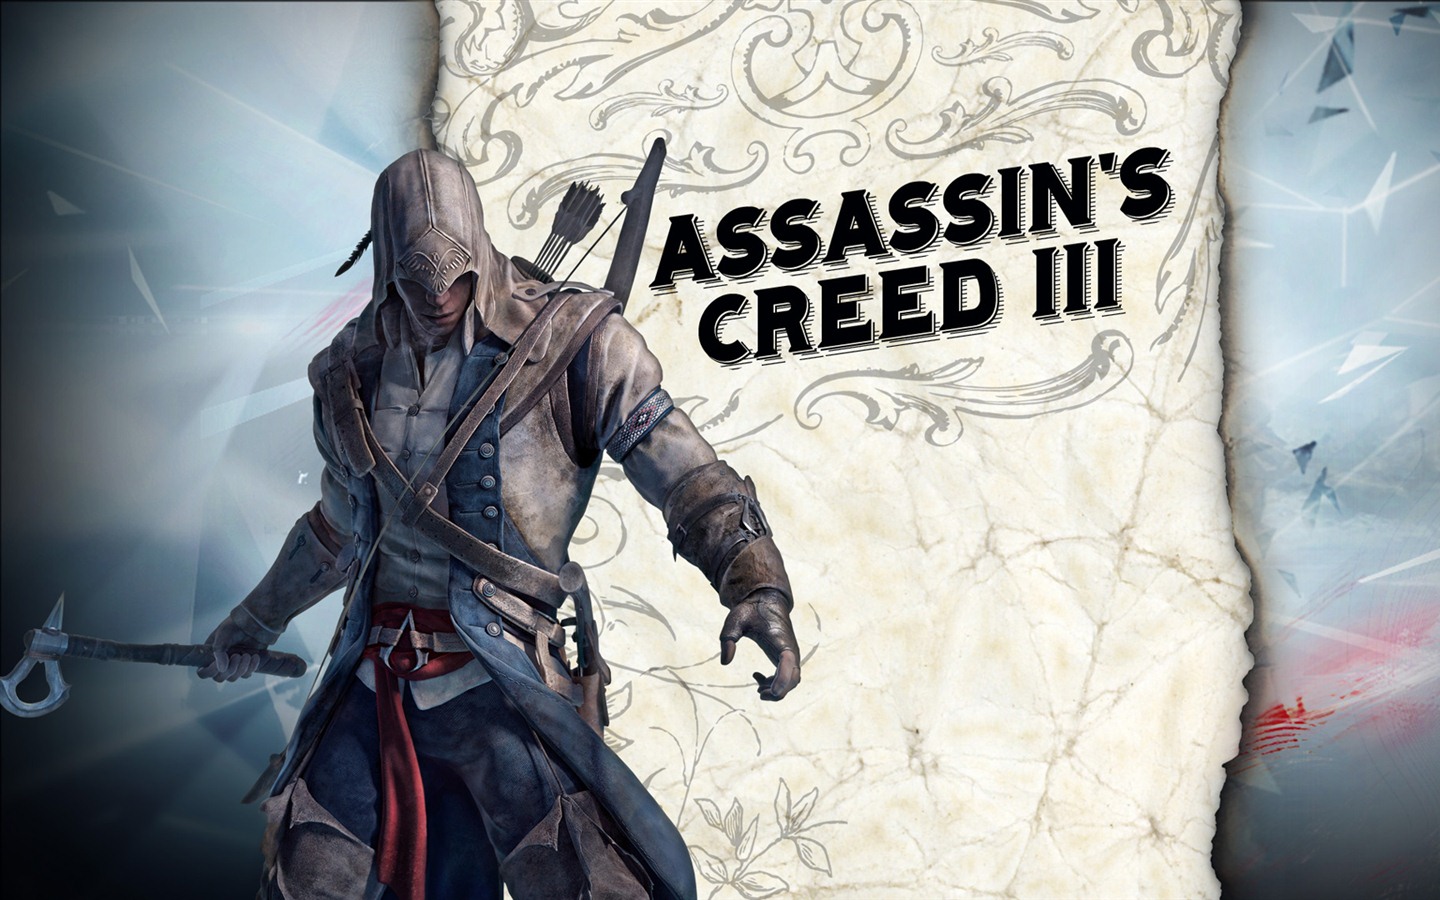 Assassin's Creed 3 HD wallpapers #7 - 1440x900